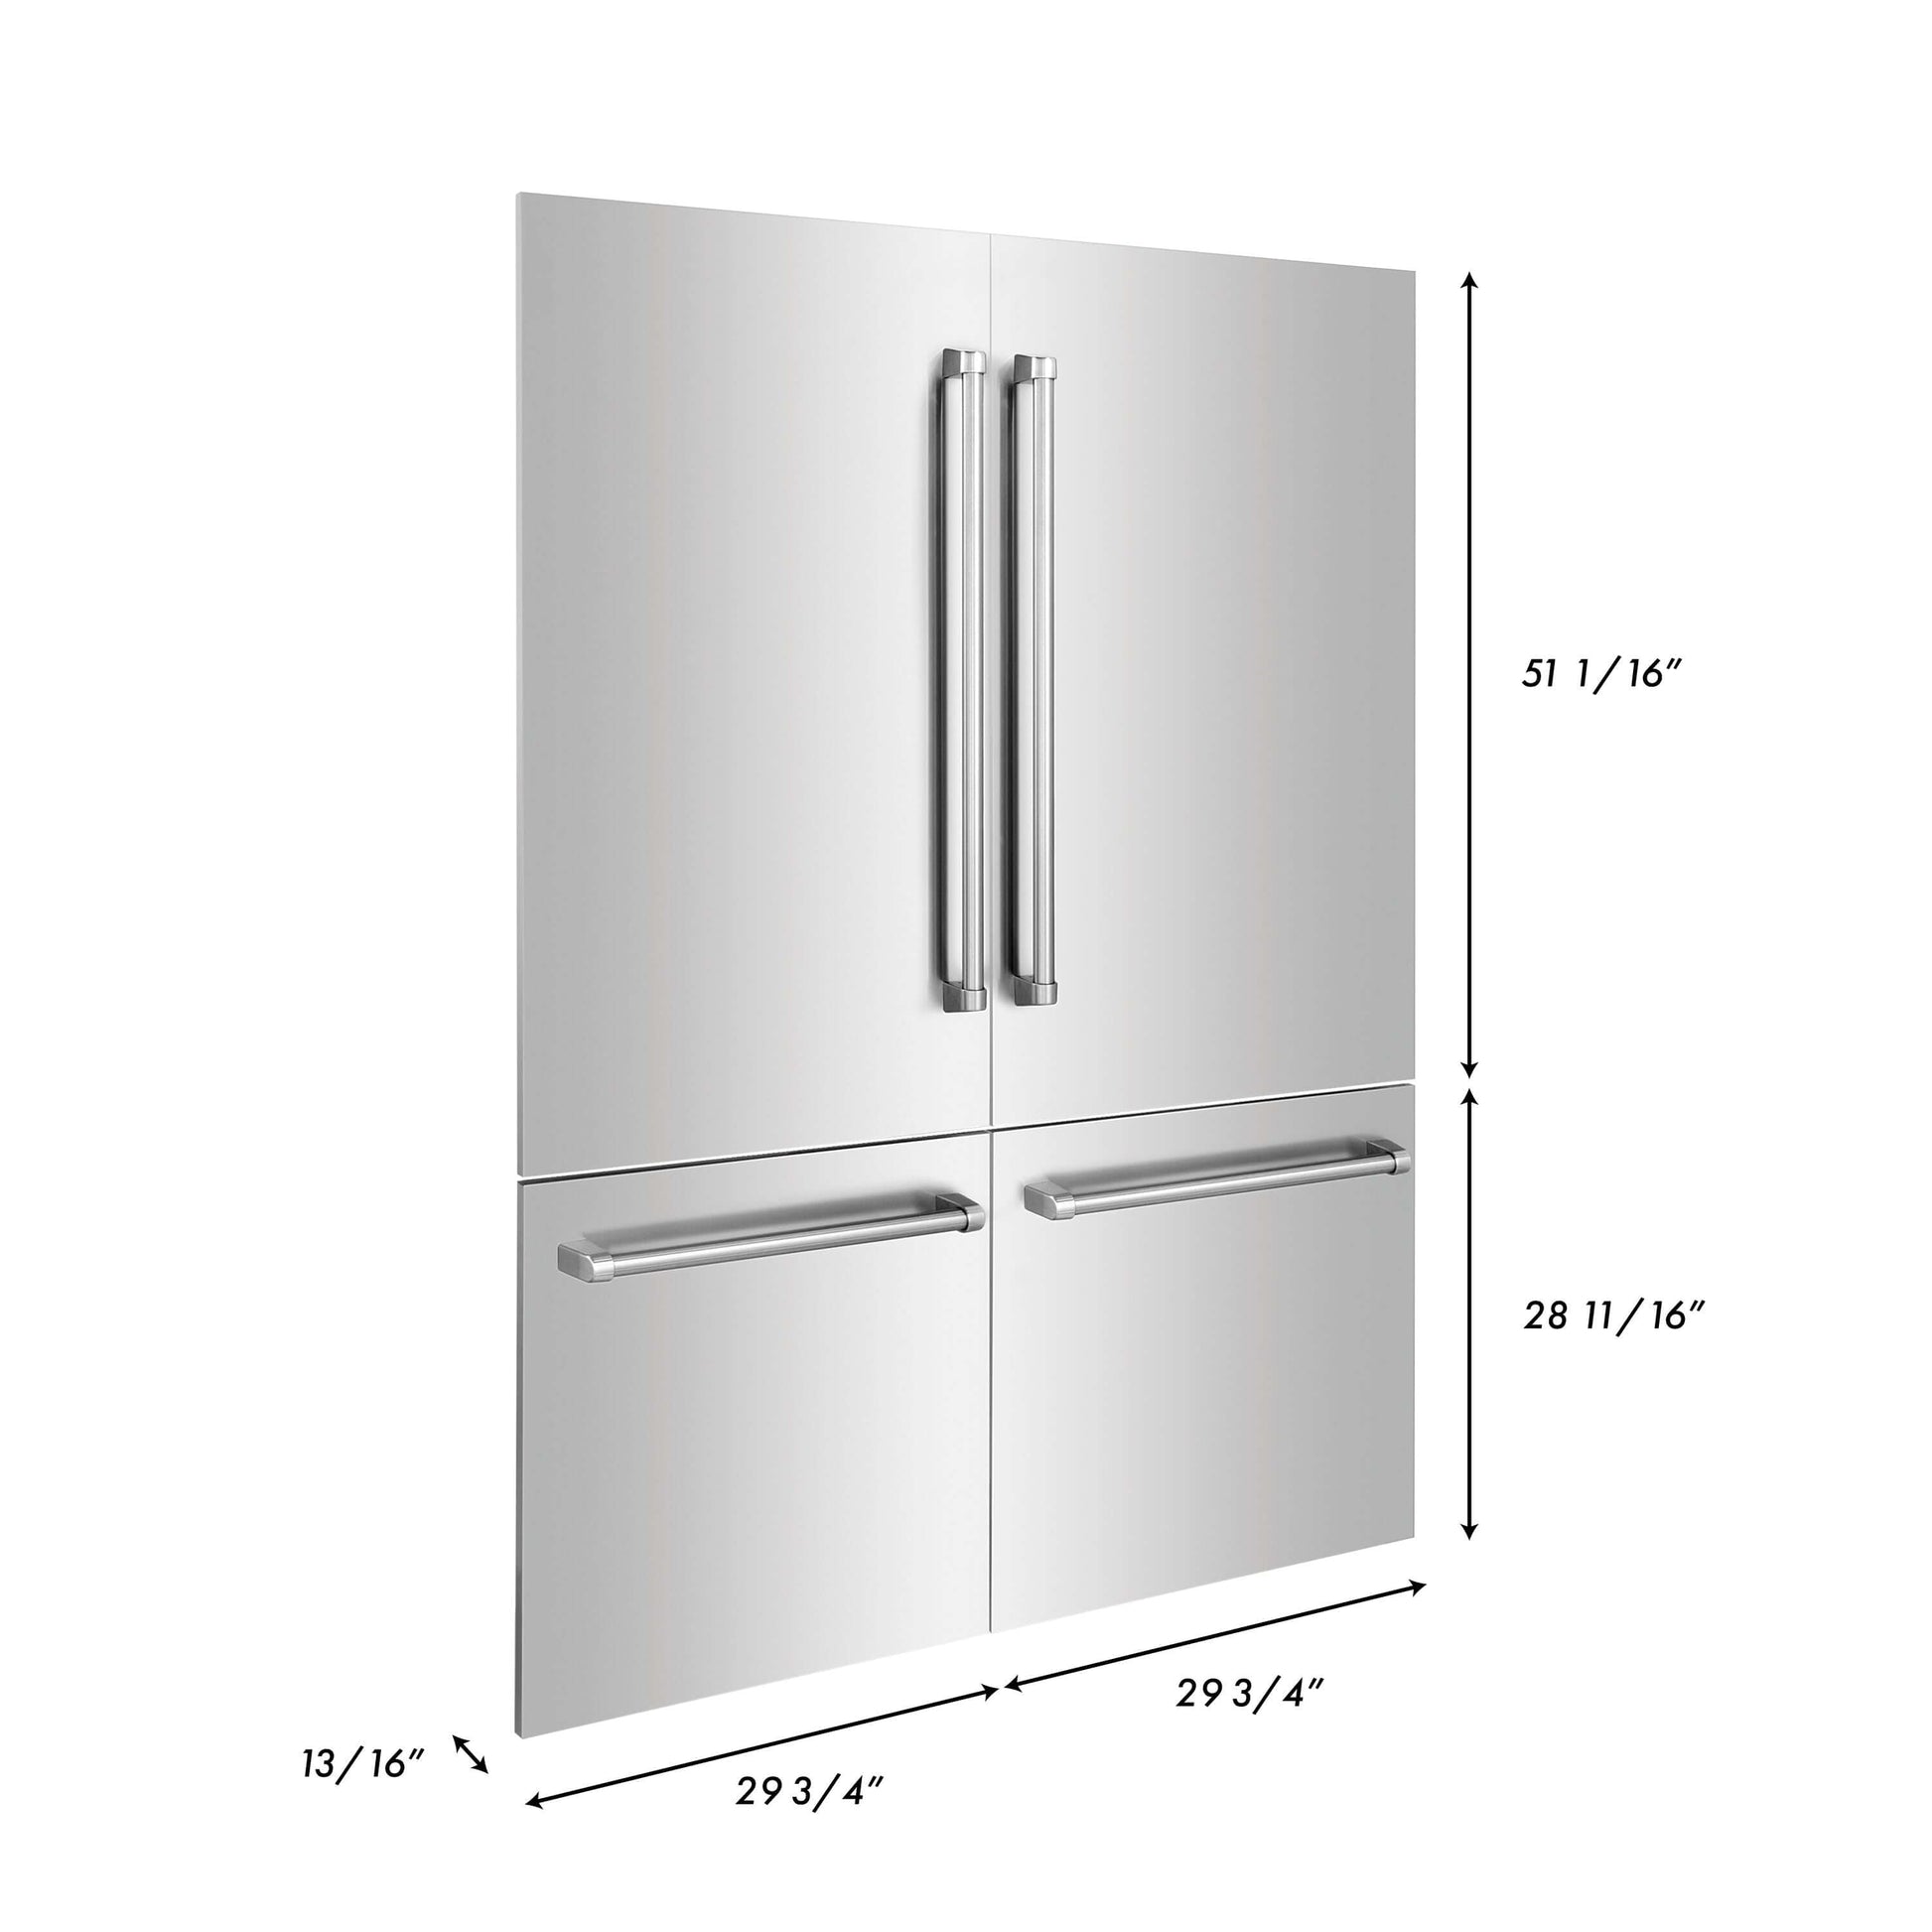 Panels & Handles Only - ZLINE 60" Refrigerator Panels in Stainless Steel